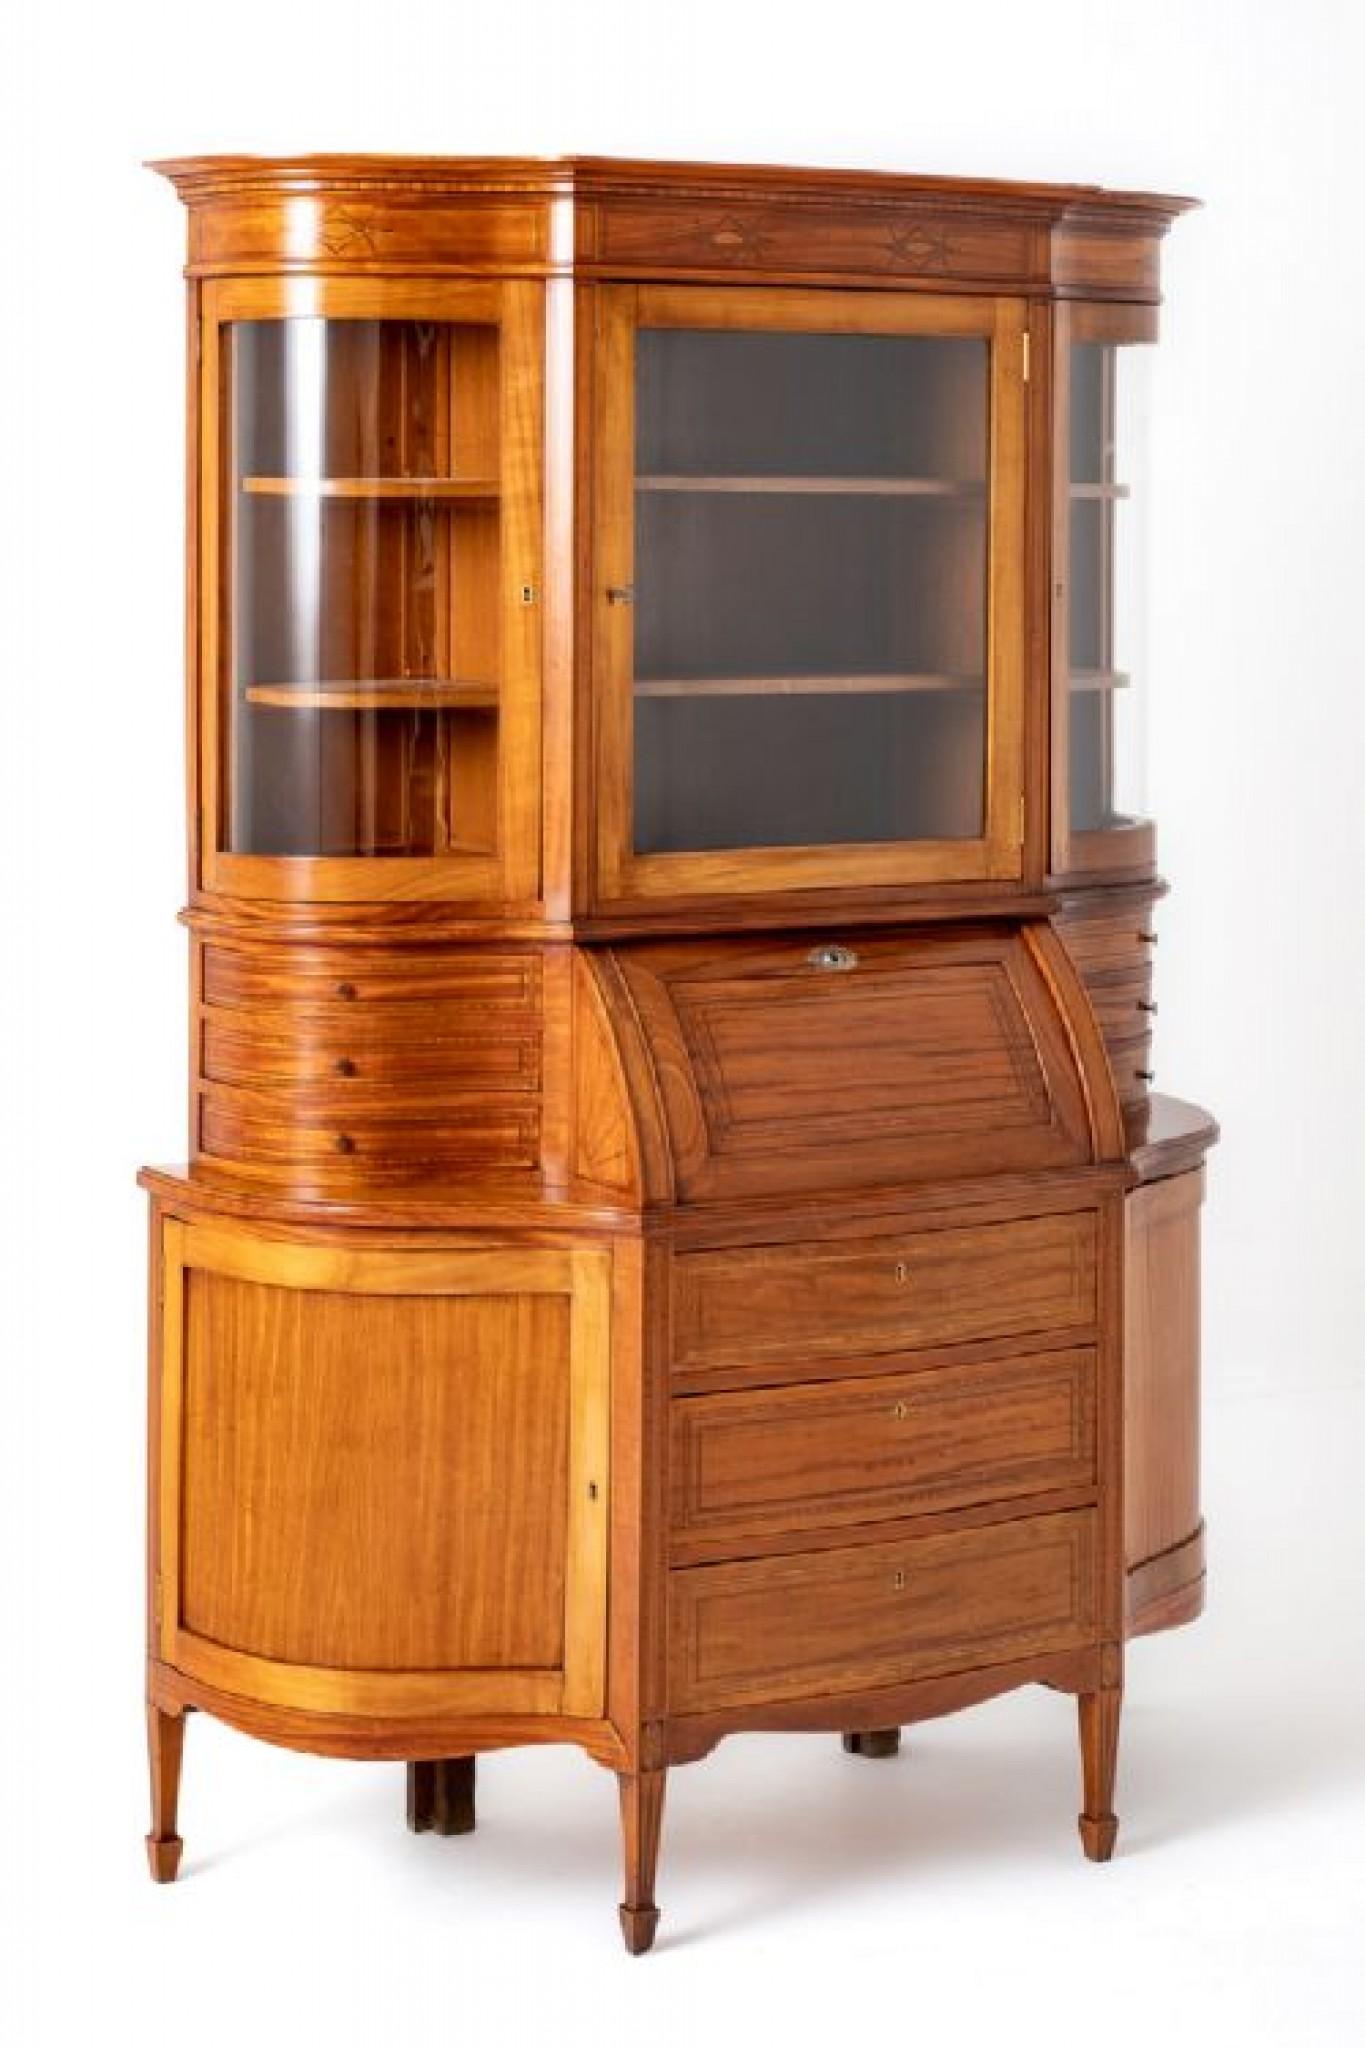 Victorian Bureau Bookcase Desk Satinwood, 1880 In Good Condition For Sale In Potters Bar, GB